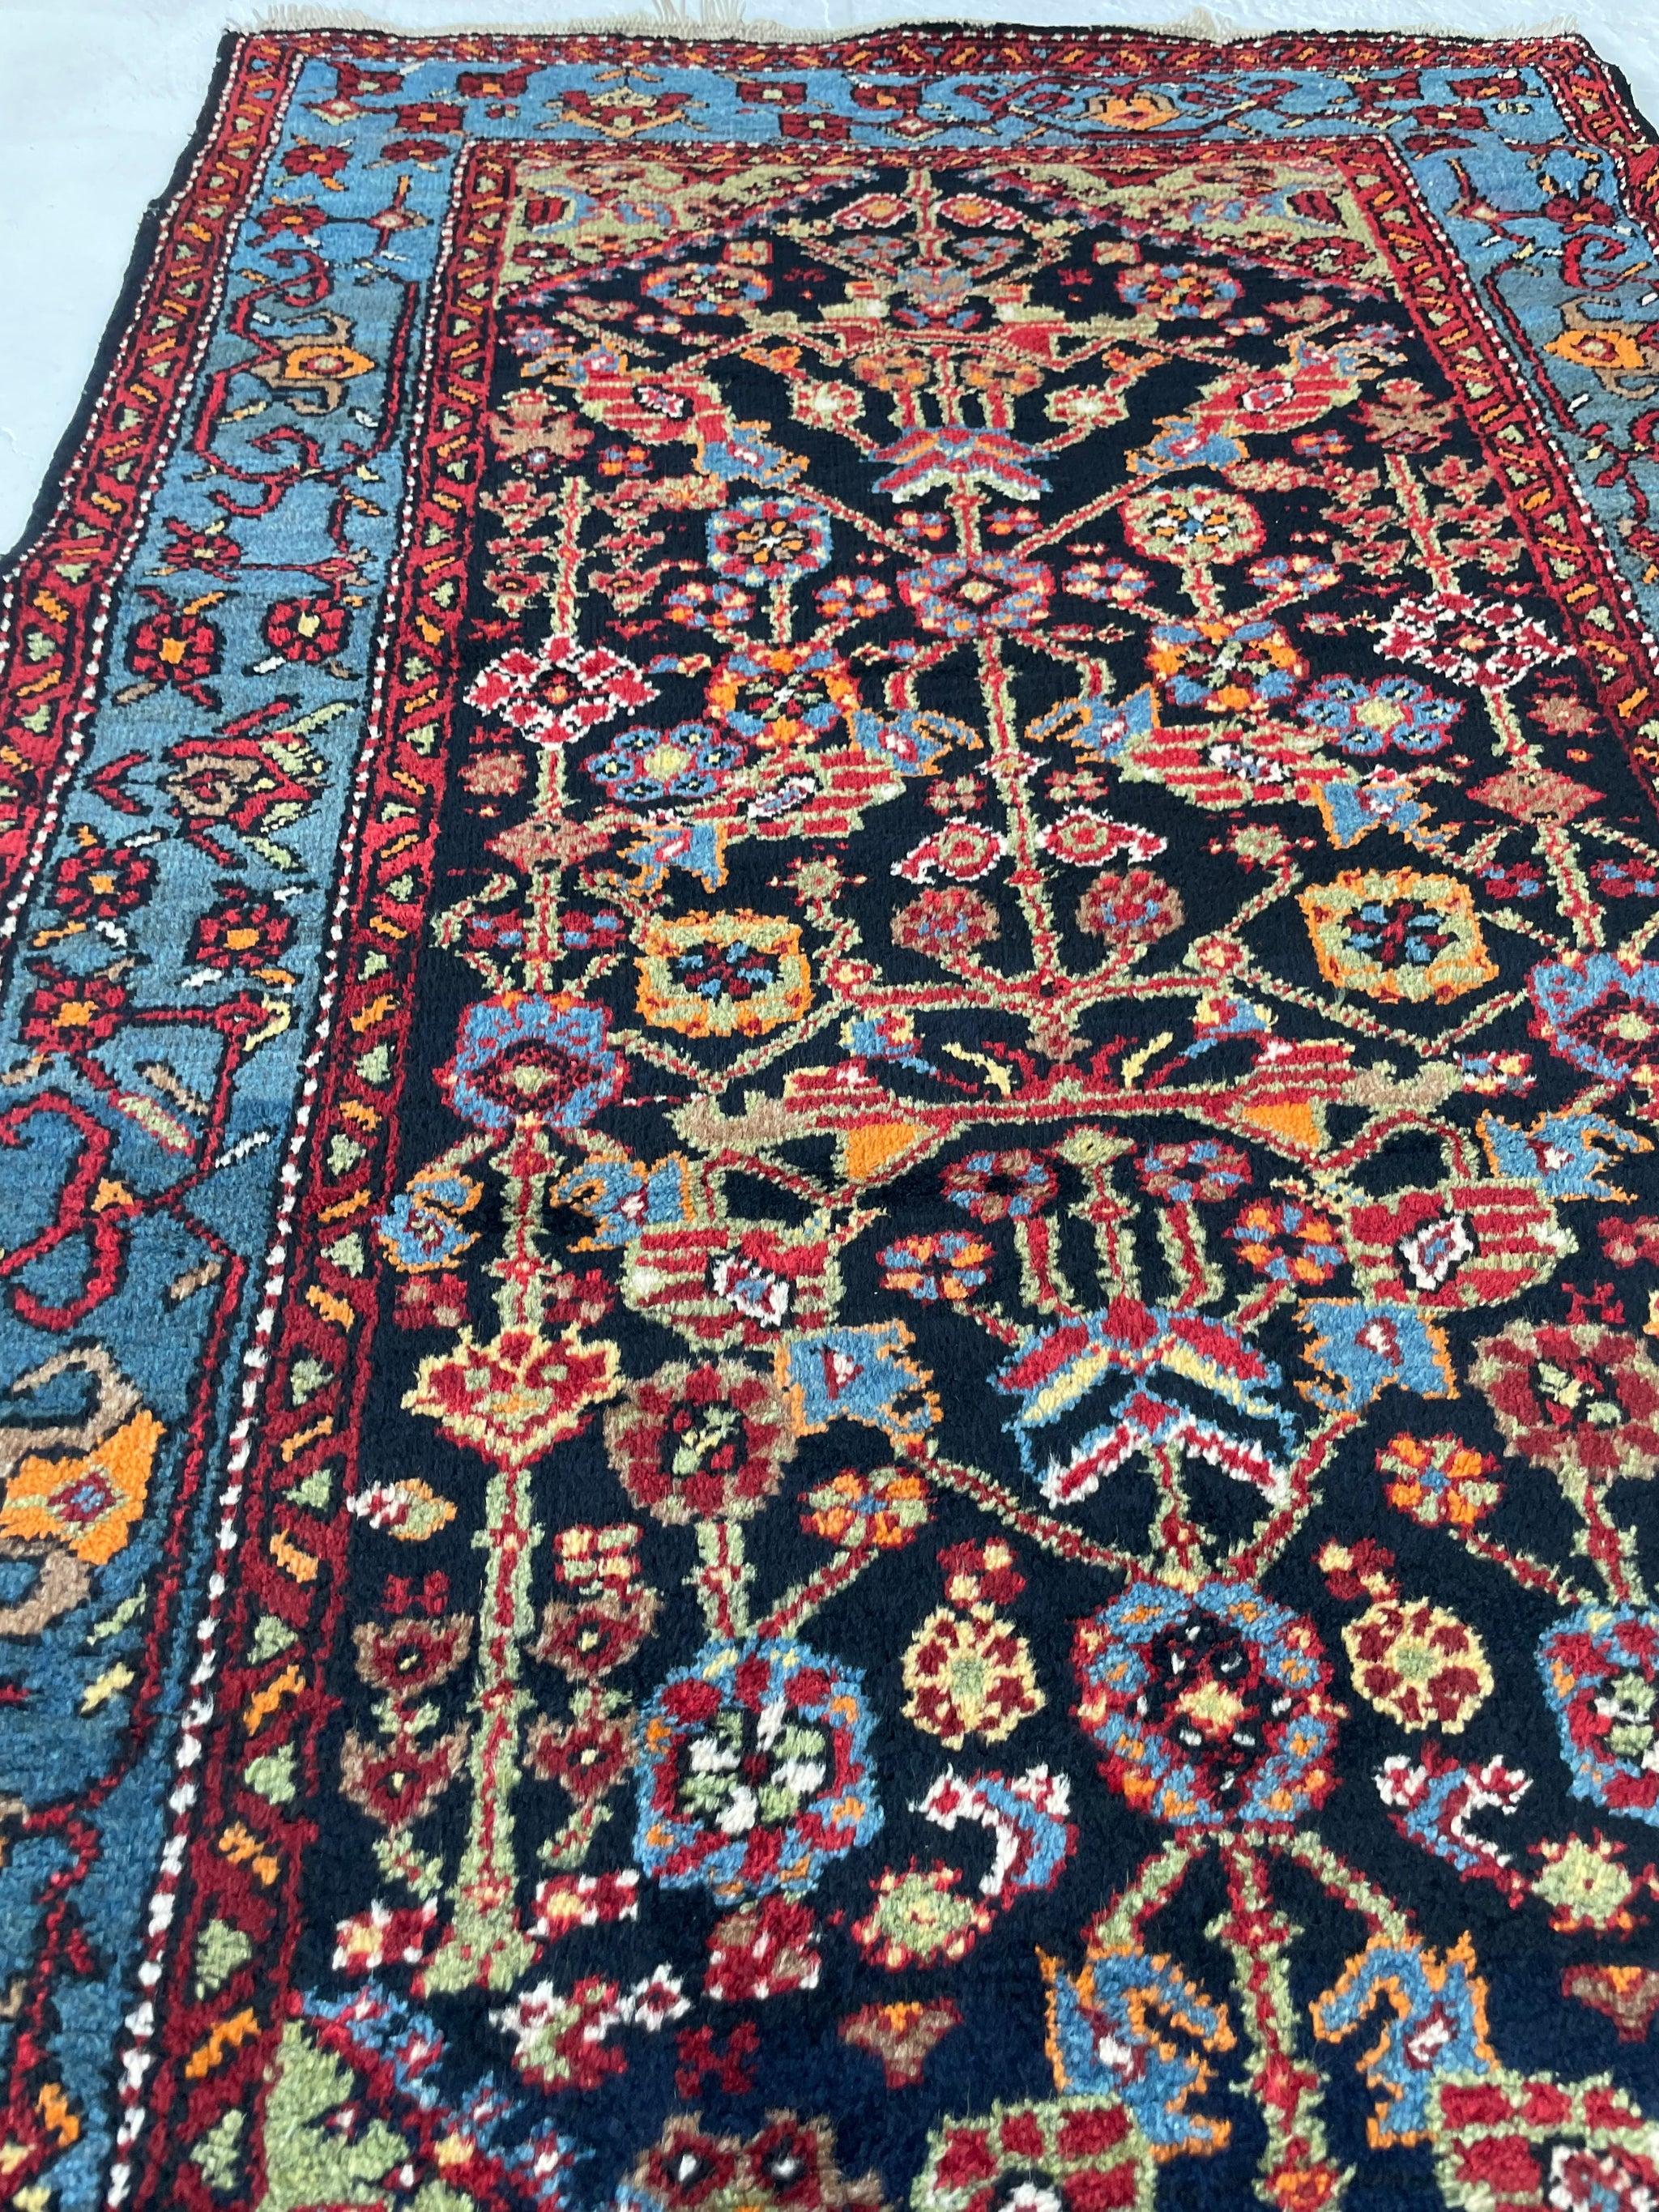 Wool Vintage Persian Rug with Lattice Design All-Over, c. 1950's For Sale